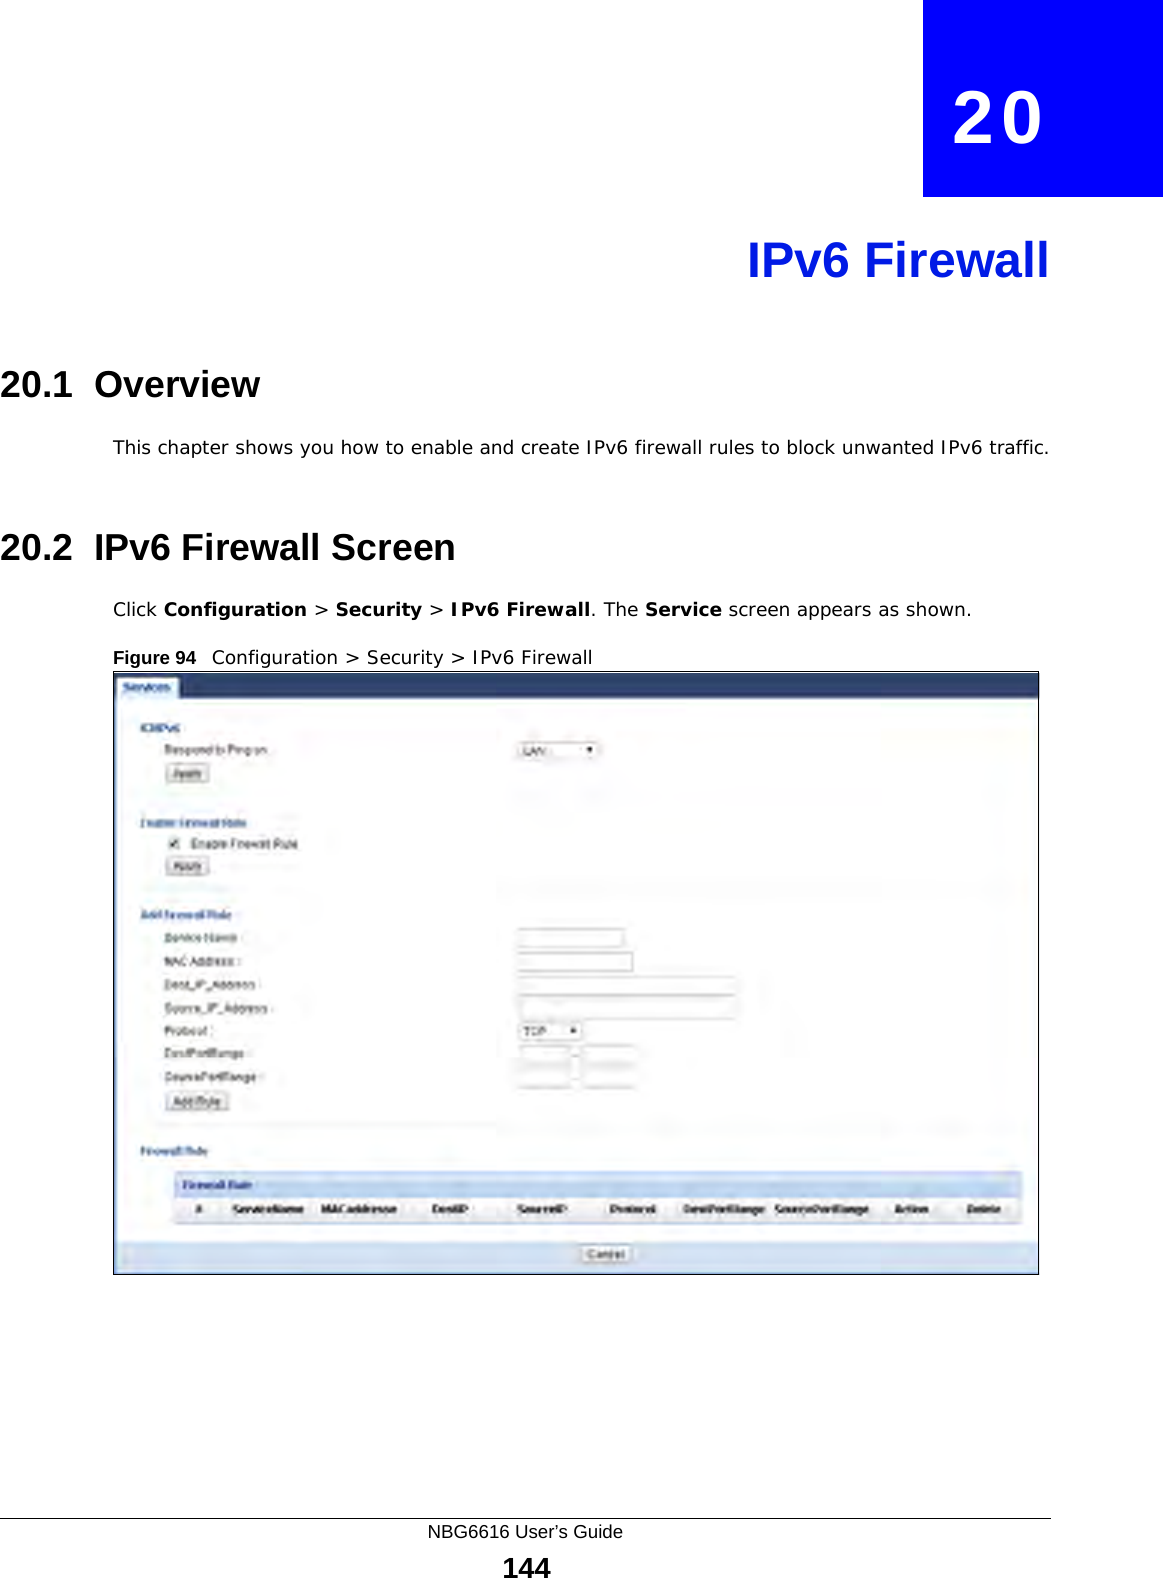 NBG6616 User’s Guide144CHAPTER   20IPv6 Firewall20.1  Overview This chapter shows you how to enable and create IPv6 firewall rules to block unwanted IPv6 traffic.20.2  IPv6 Firewall Screen Click Configuration &gt; Security &gt; IPv6 Firewall. The Service screen appears as shown.Figure 94   Configuration &gt; Security &gt; IPv6 Firewall